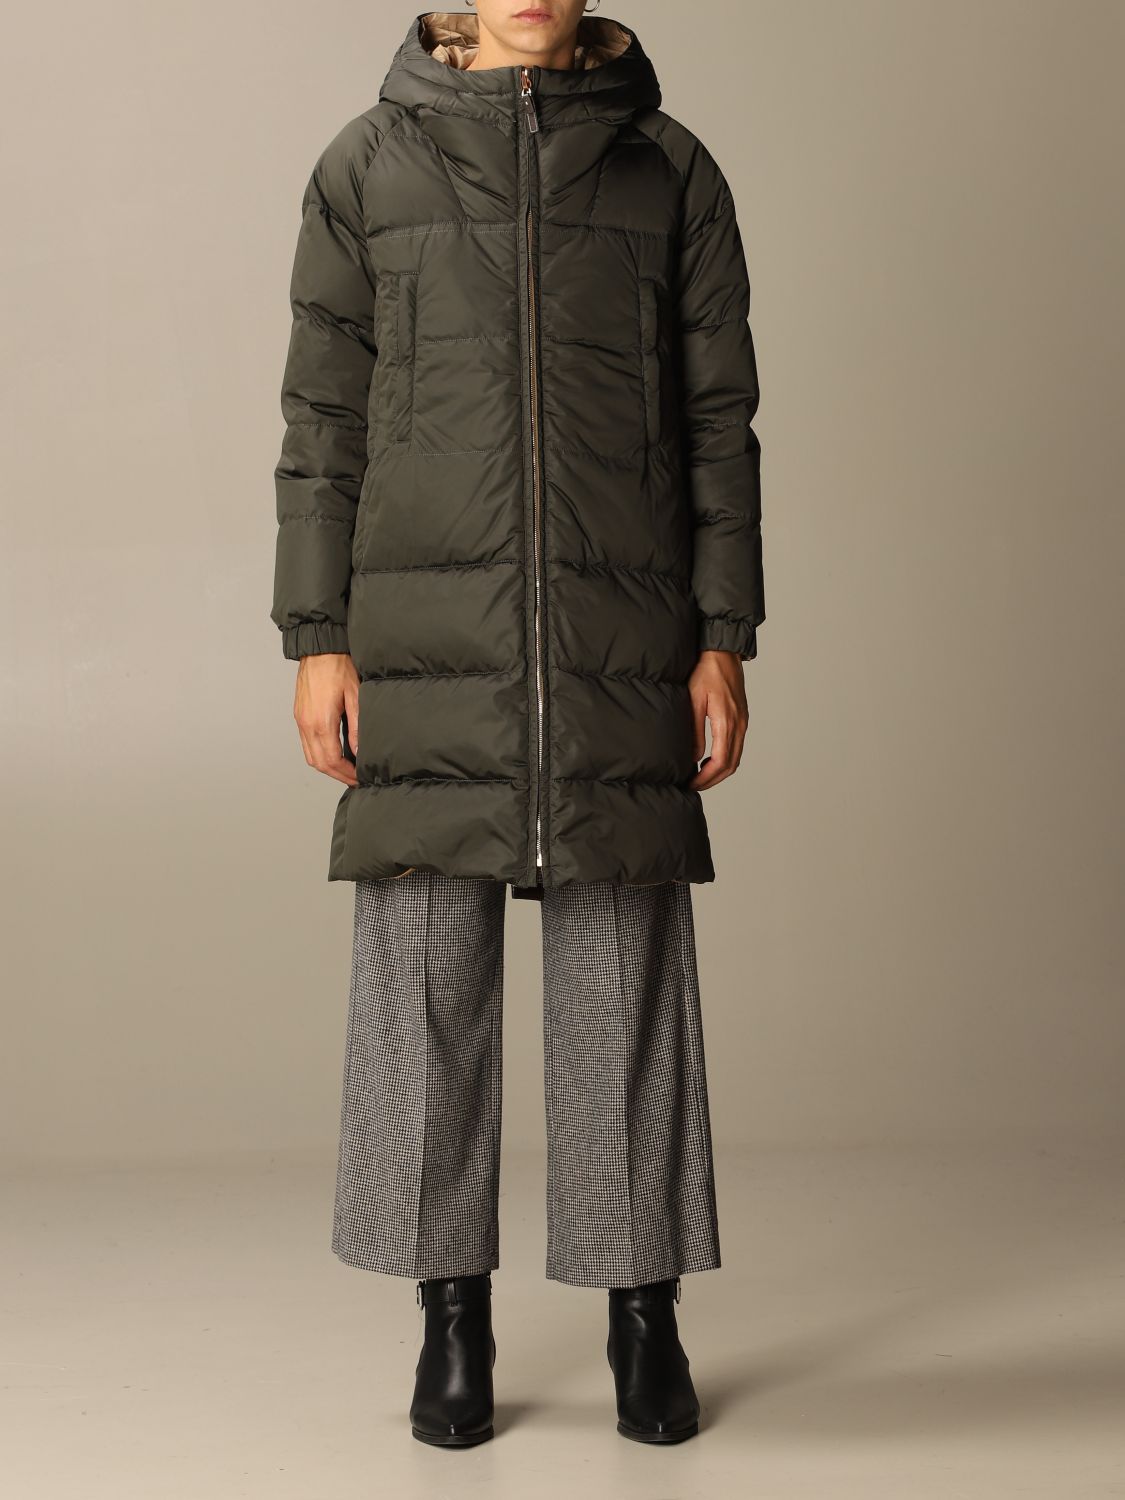 Max Mara The Cube Outlet: reversible down jacket with hood - Kaki | Max ...